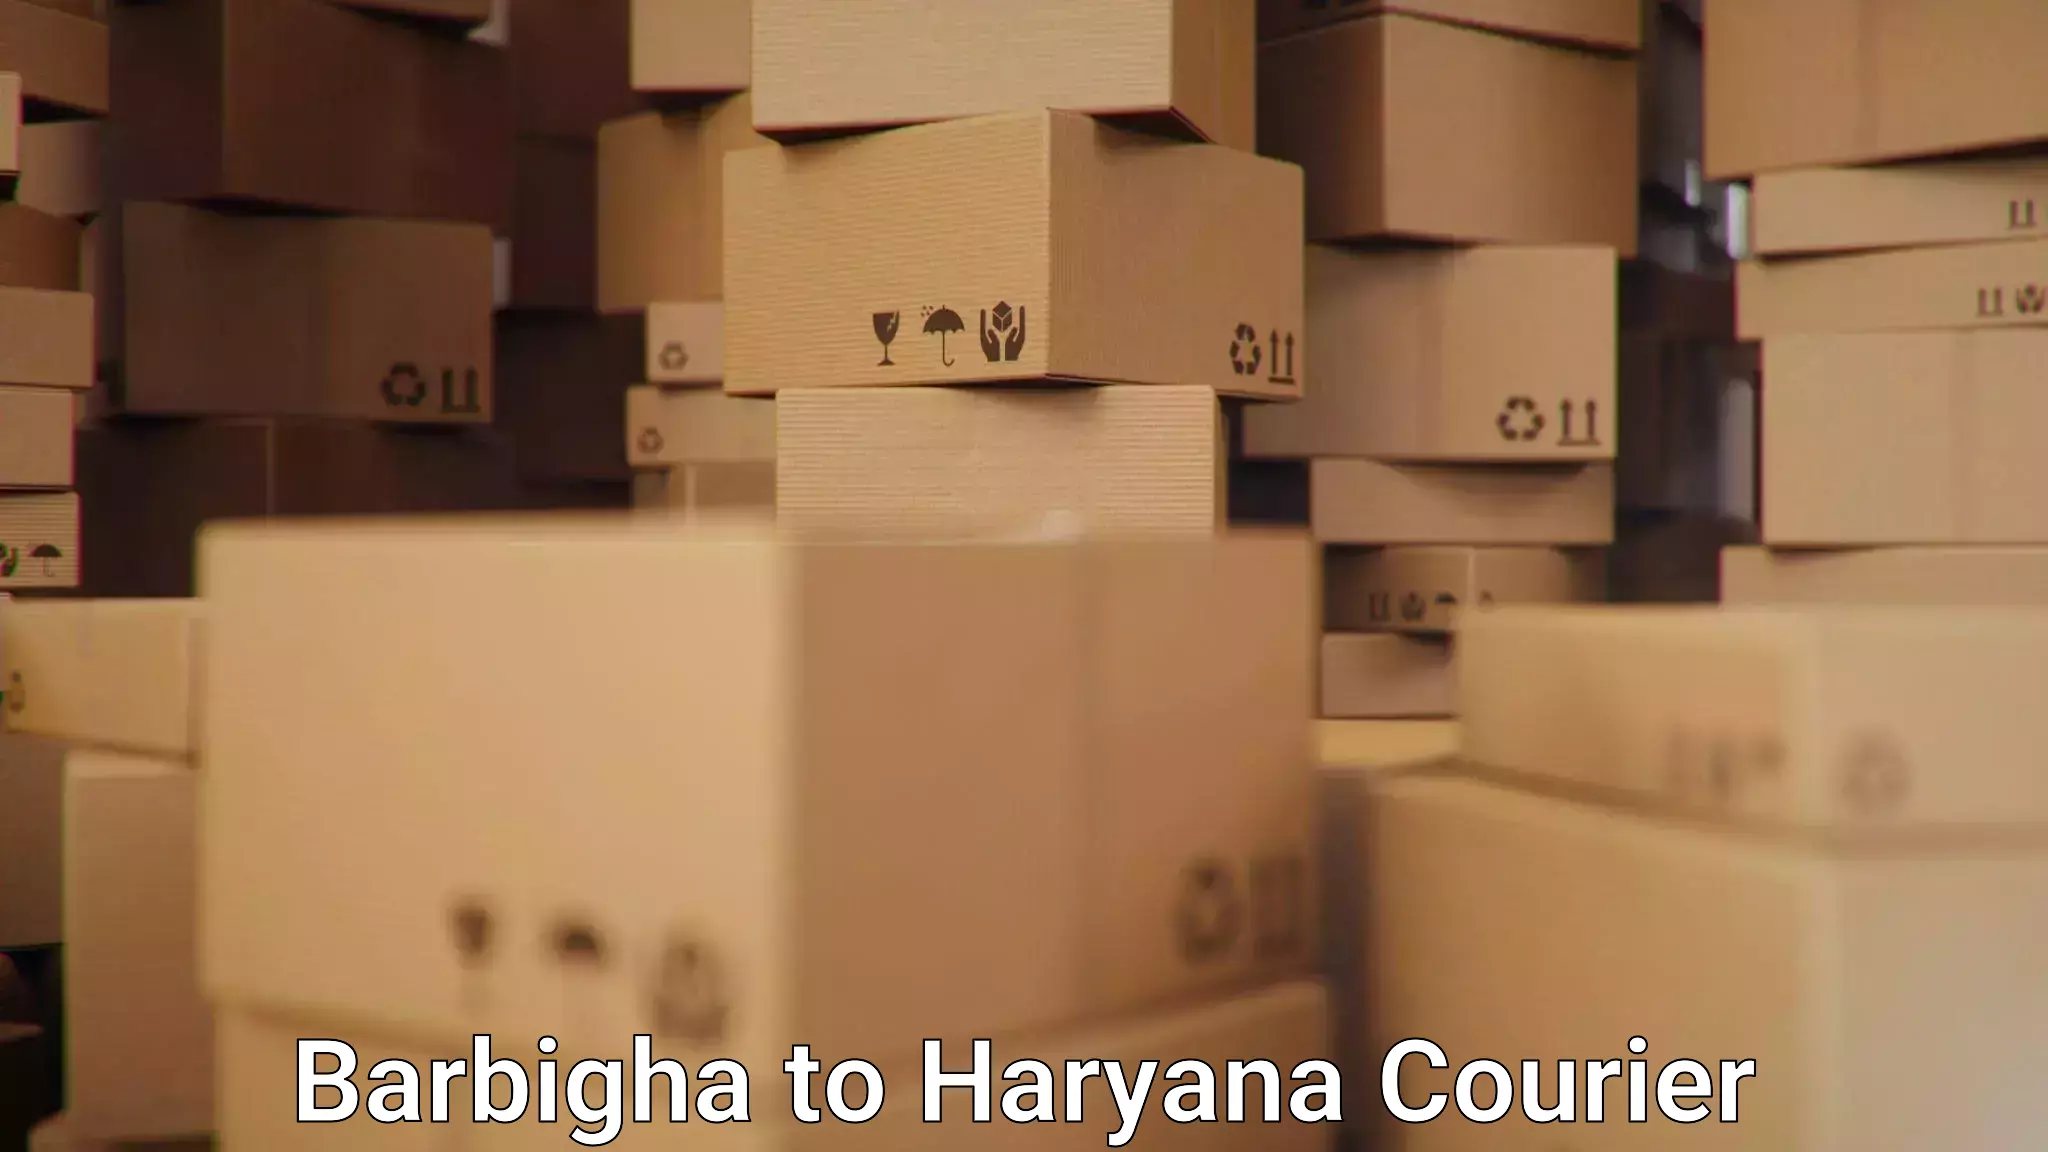 Cost-effective freight solutions Barbigha to Chaudhary Charan Singh Haryana Agricultural University Hisar